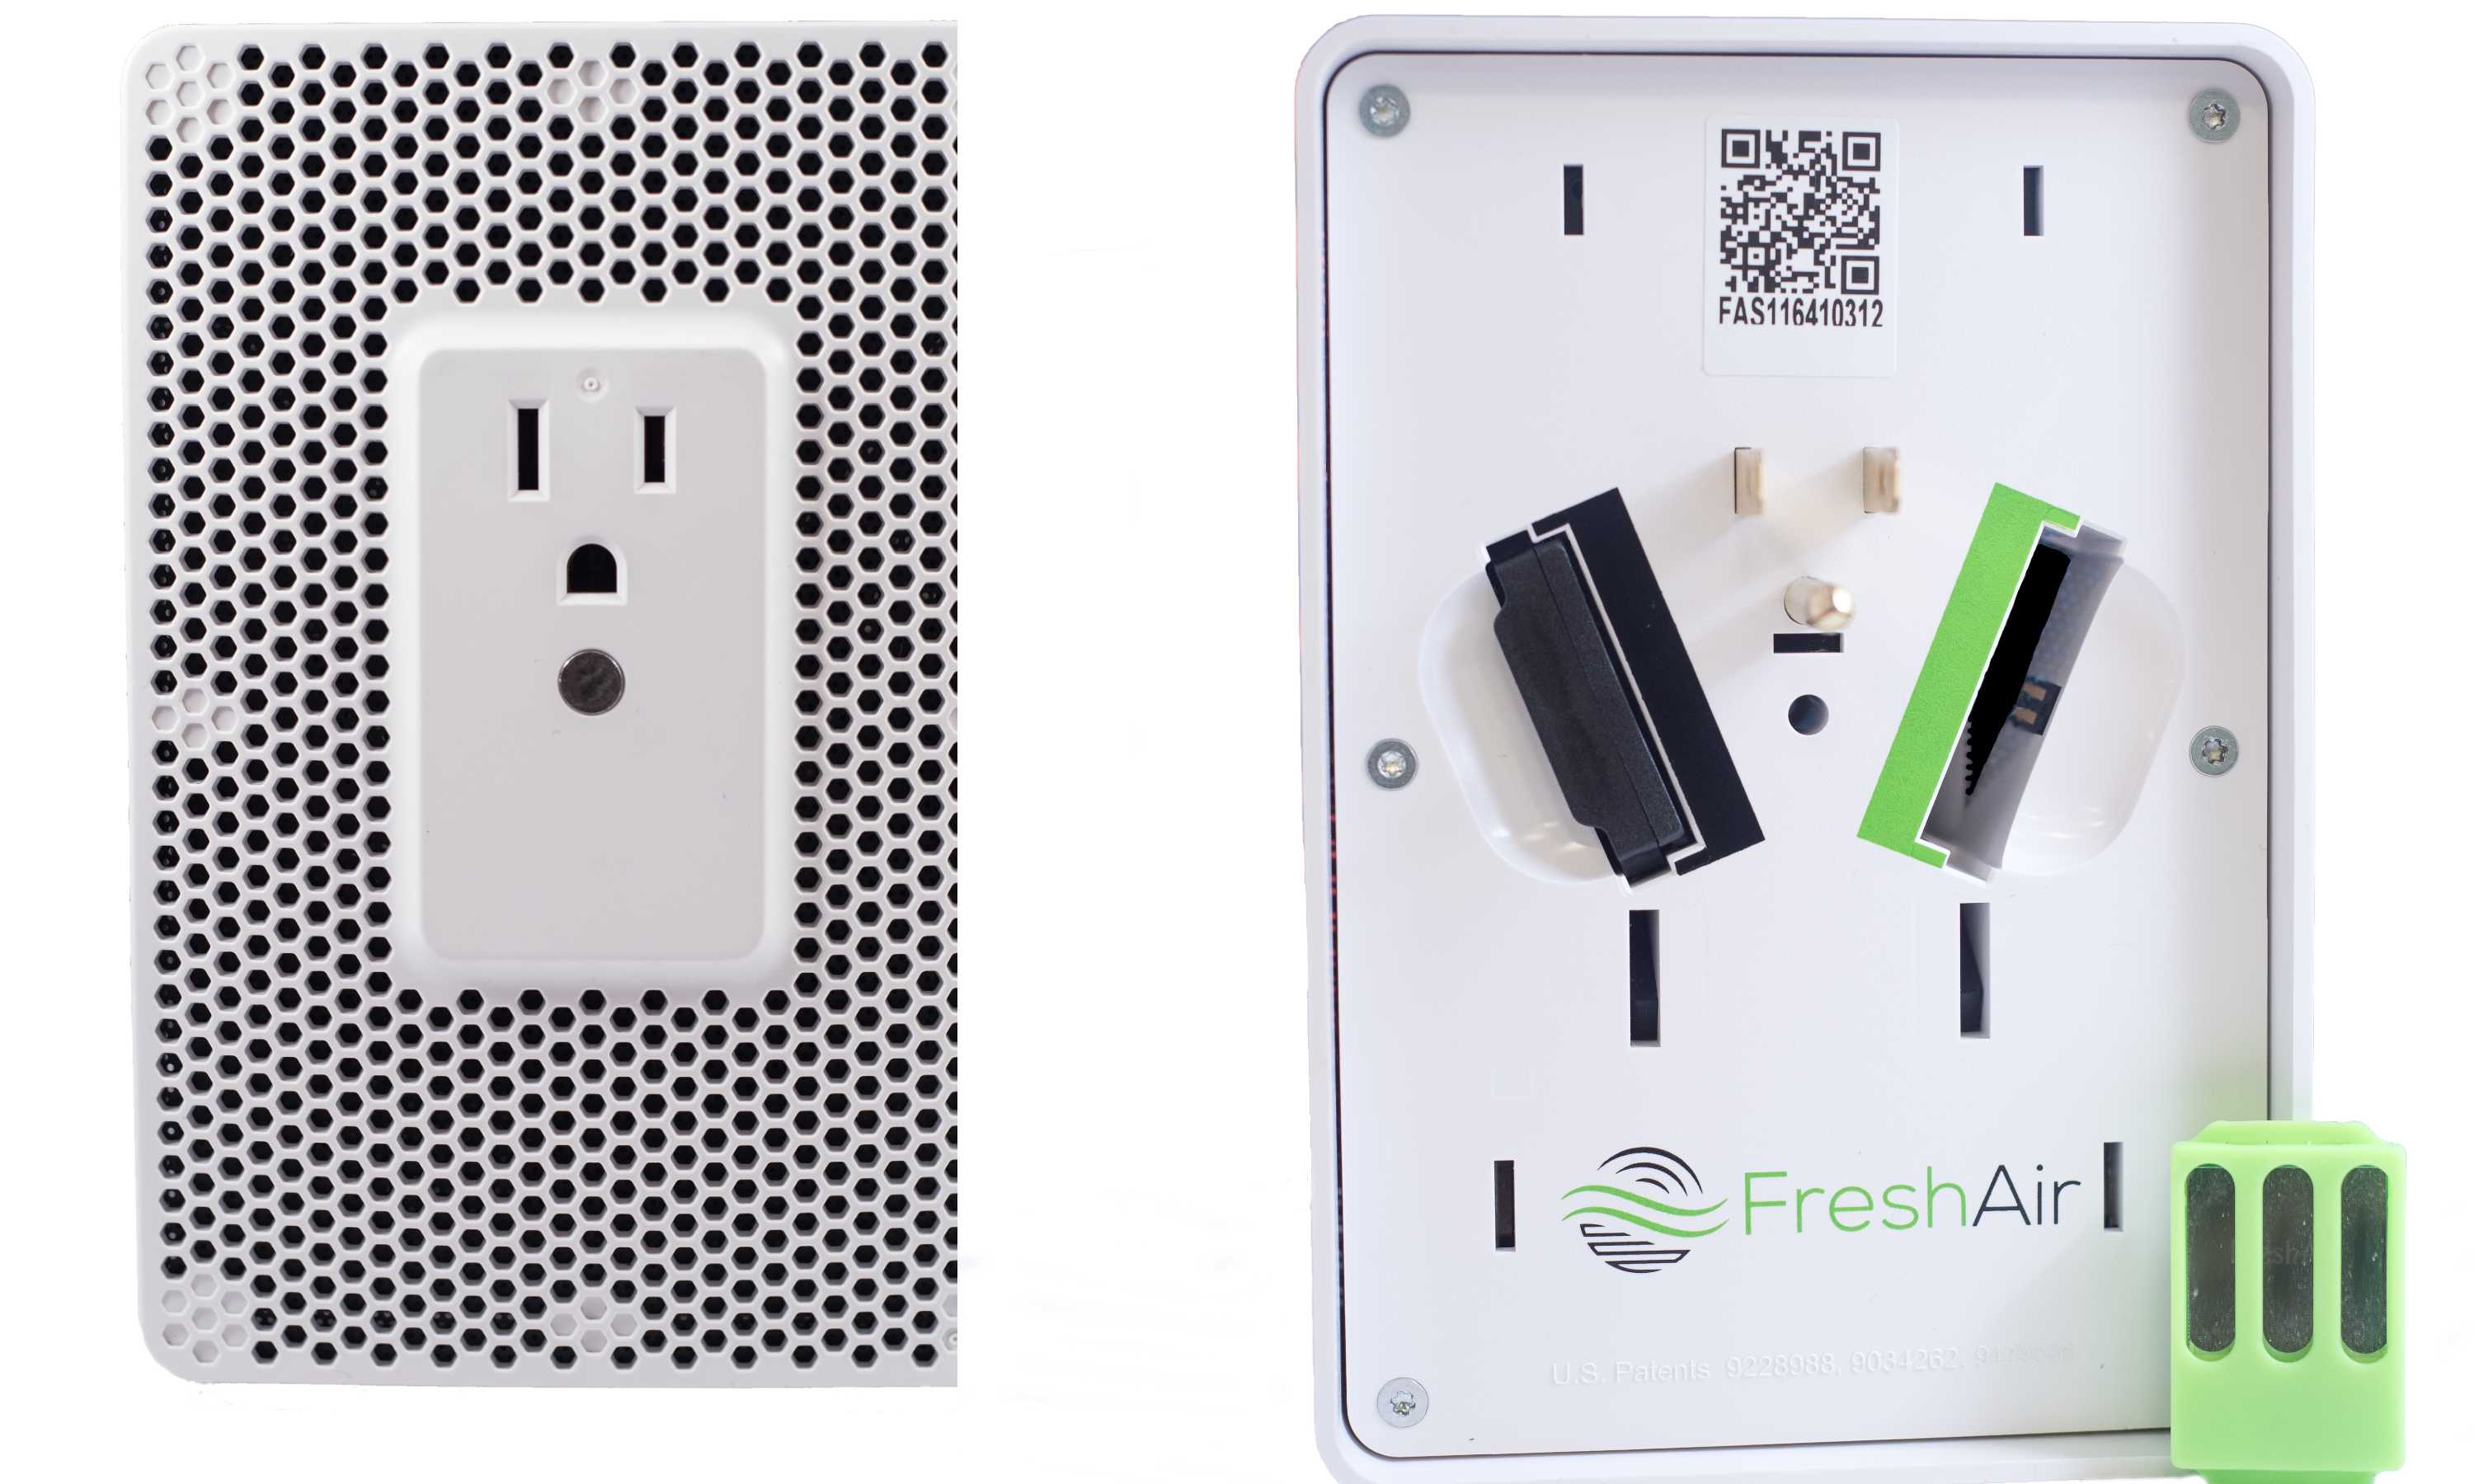 FreshAir announces unique and highly effective smoking detection system for educational settings